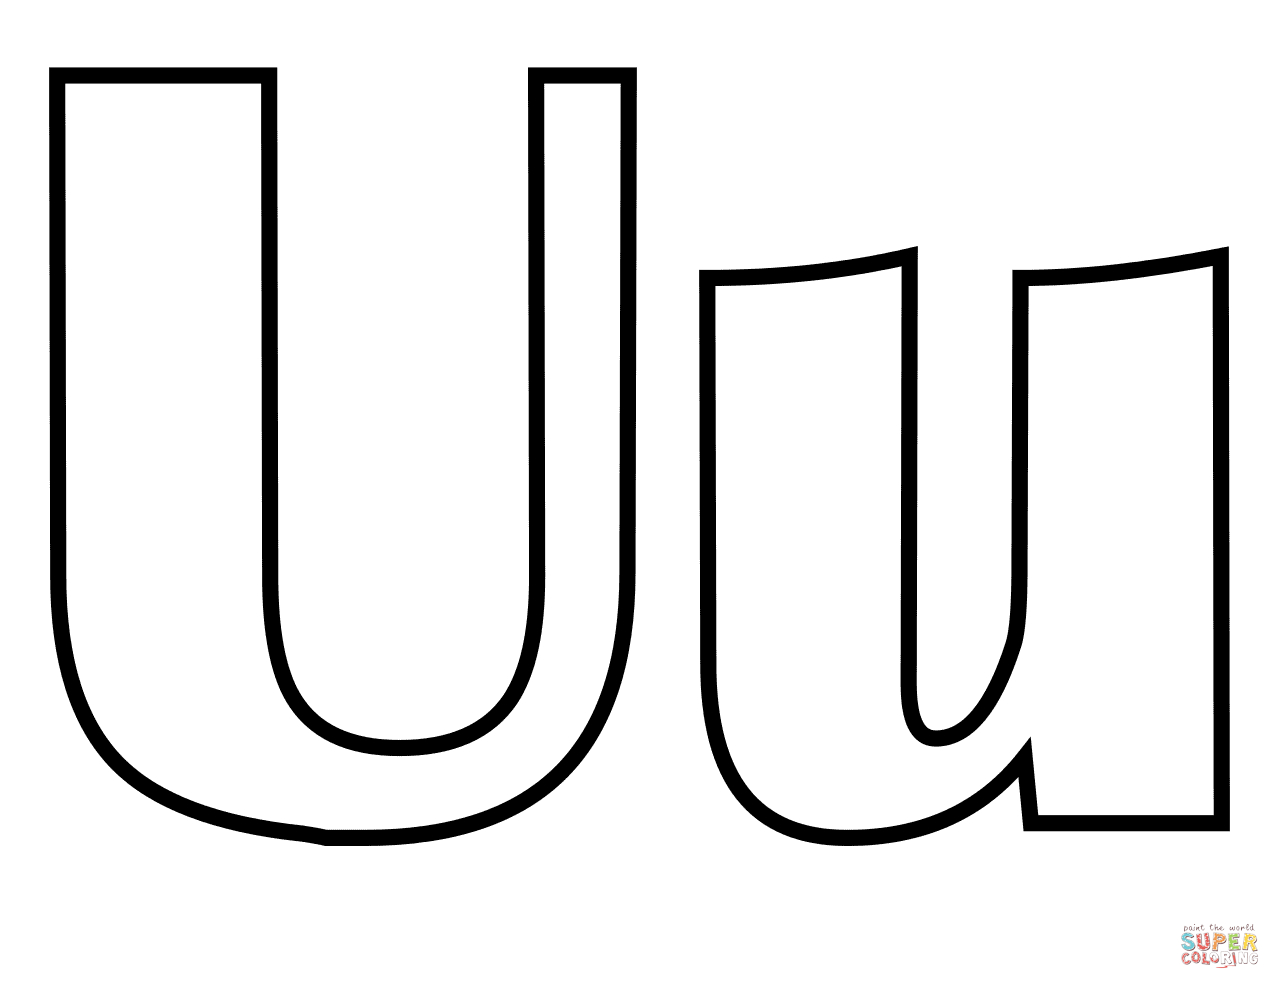 Classic Letter U Coloring Page | Free Printable Coloring Pages - Free Printable Letter U Coloring Pages